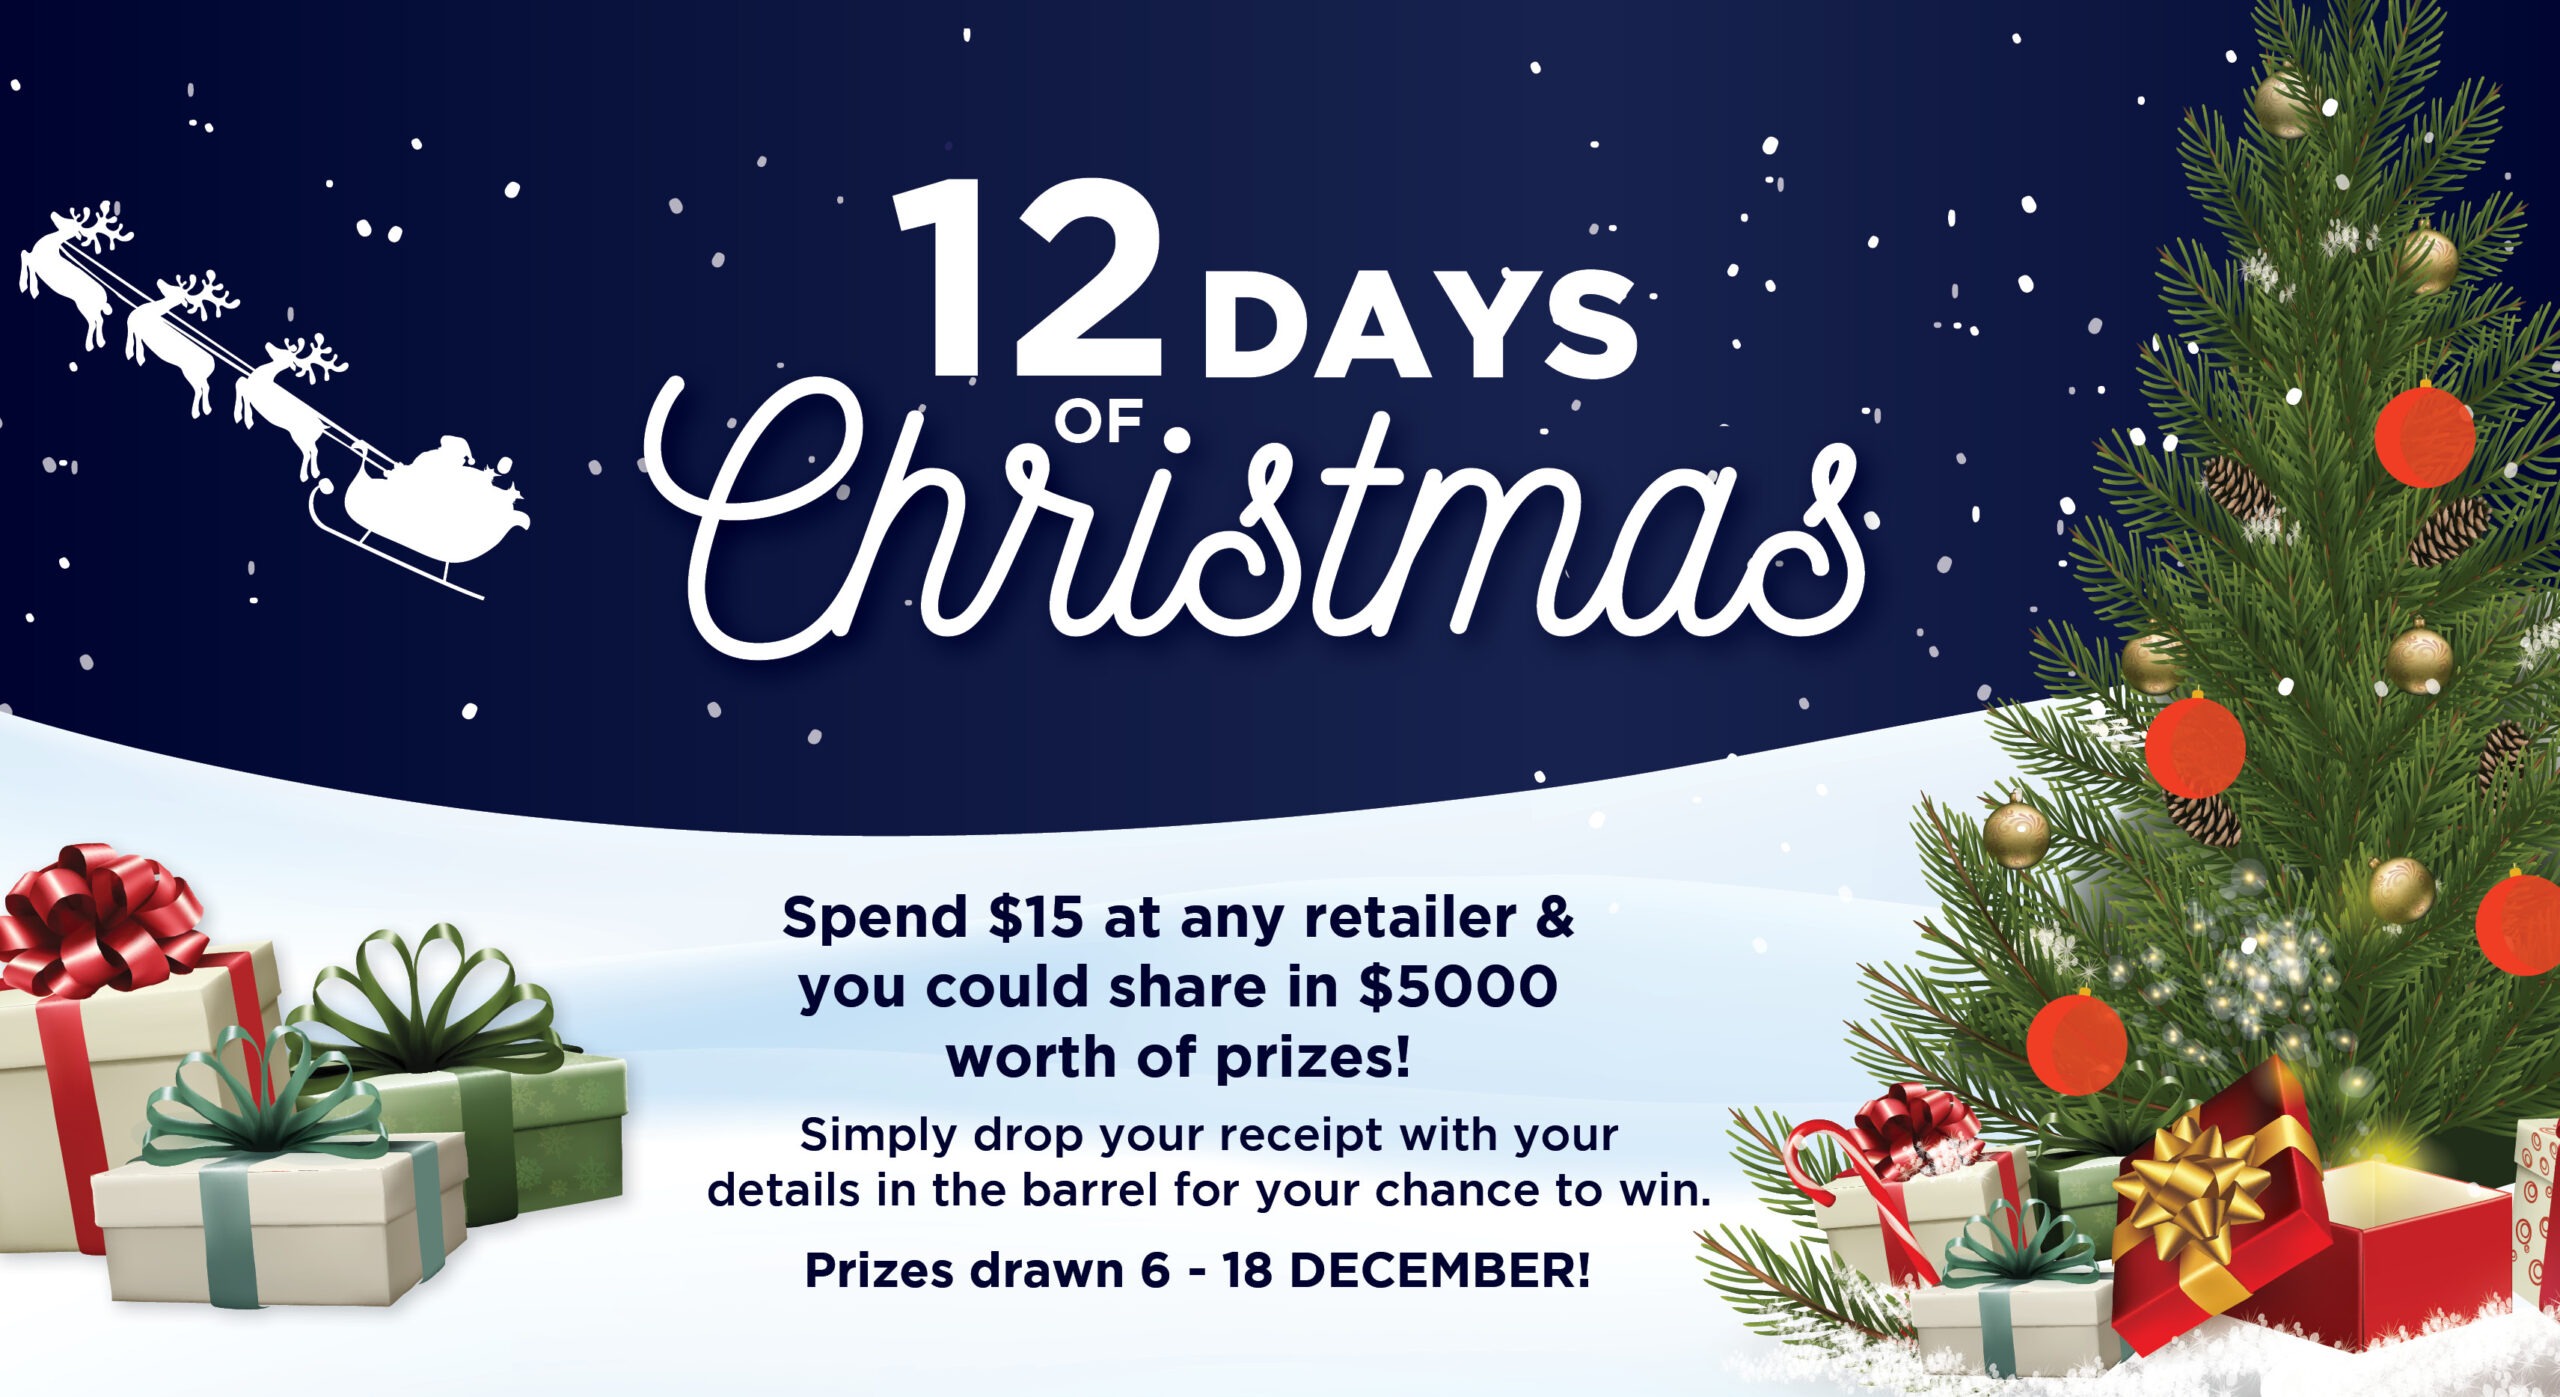 12 Days of Christmas at the Plaza